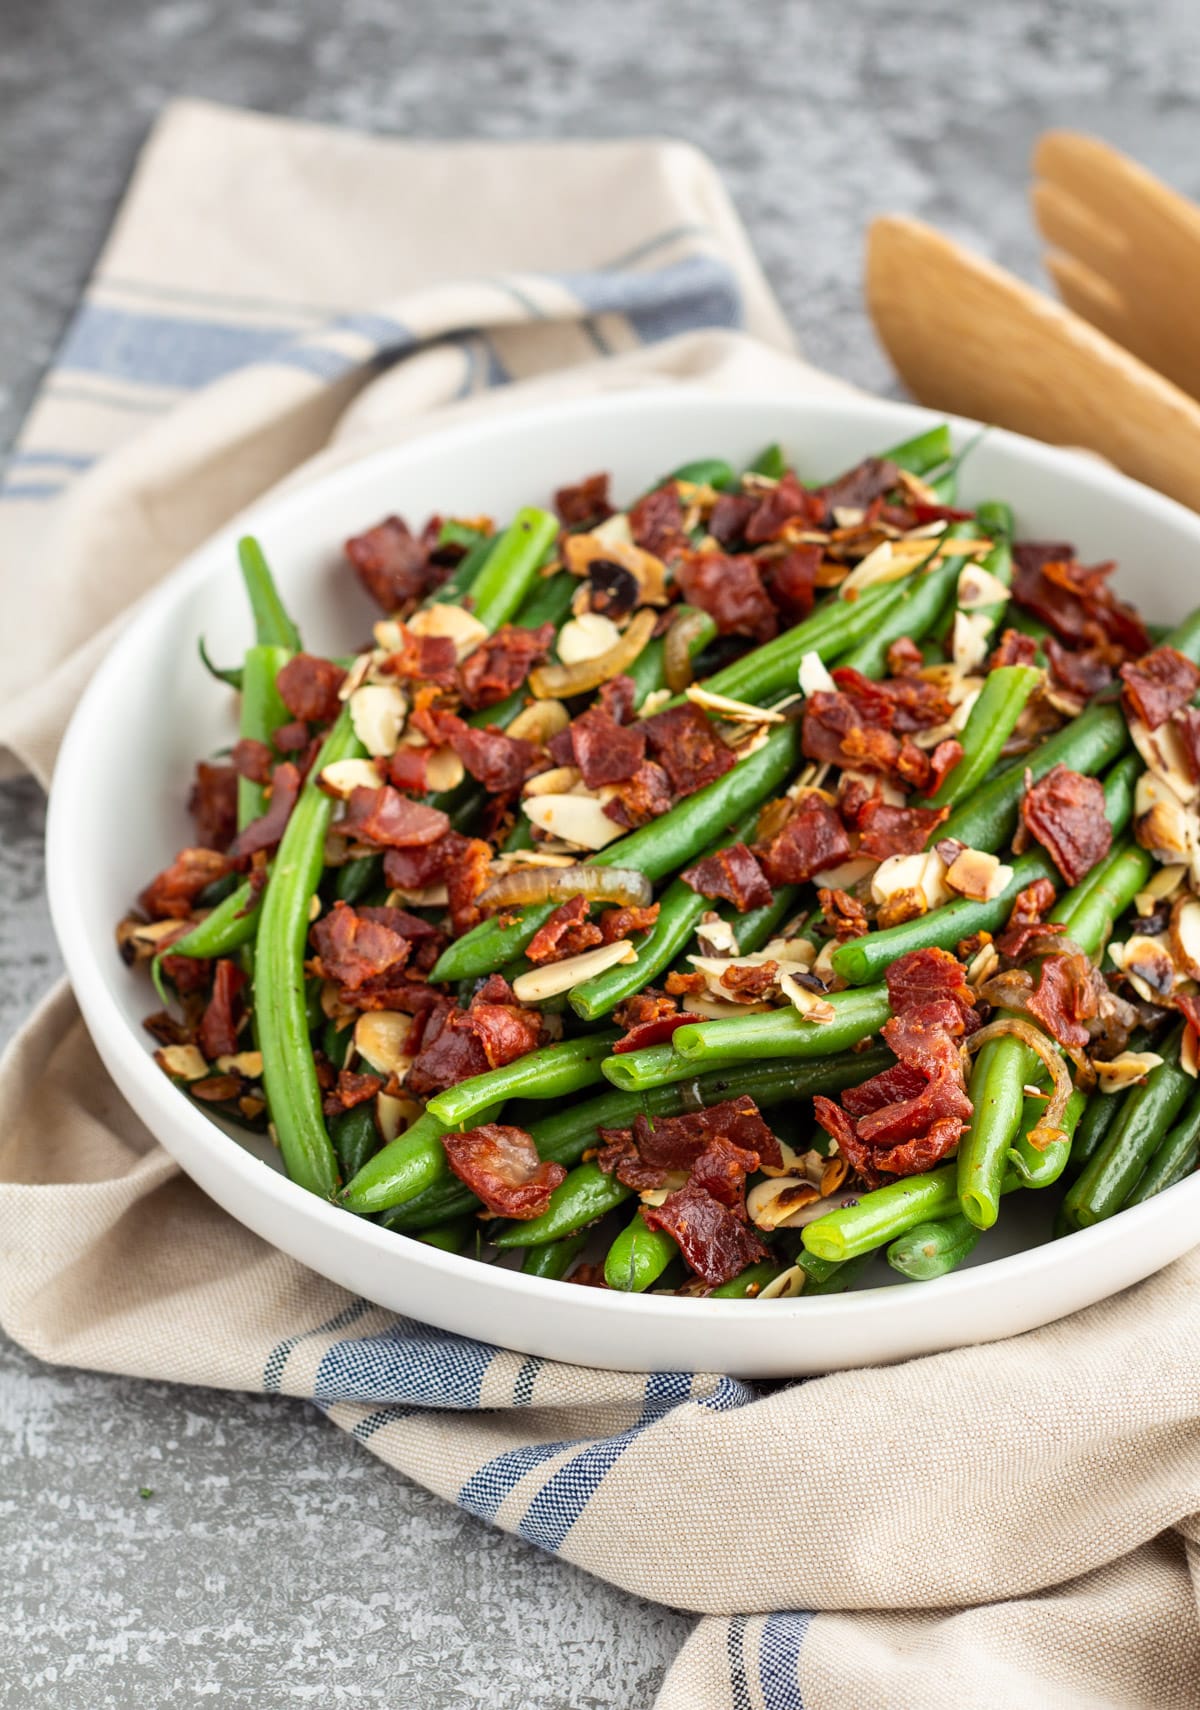 green beans with almonds and crisp prosciutto in a white bowl on a towel